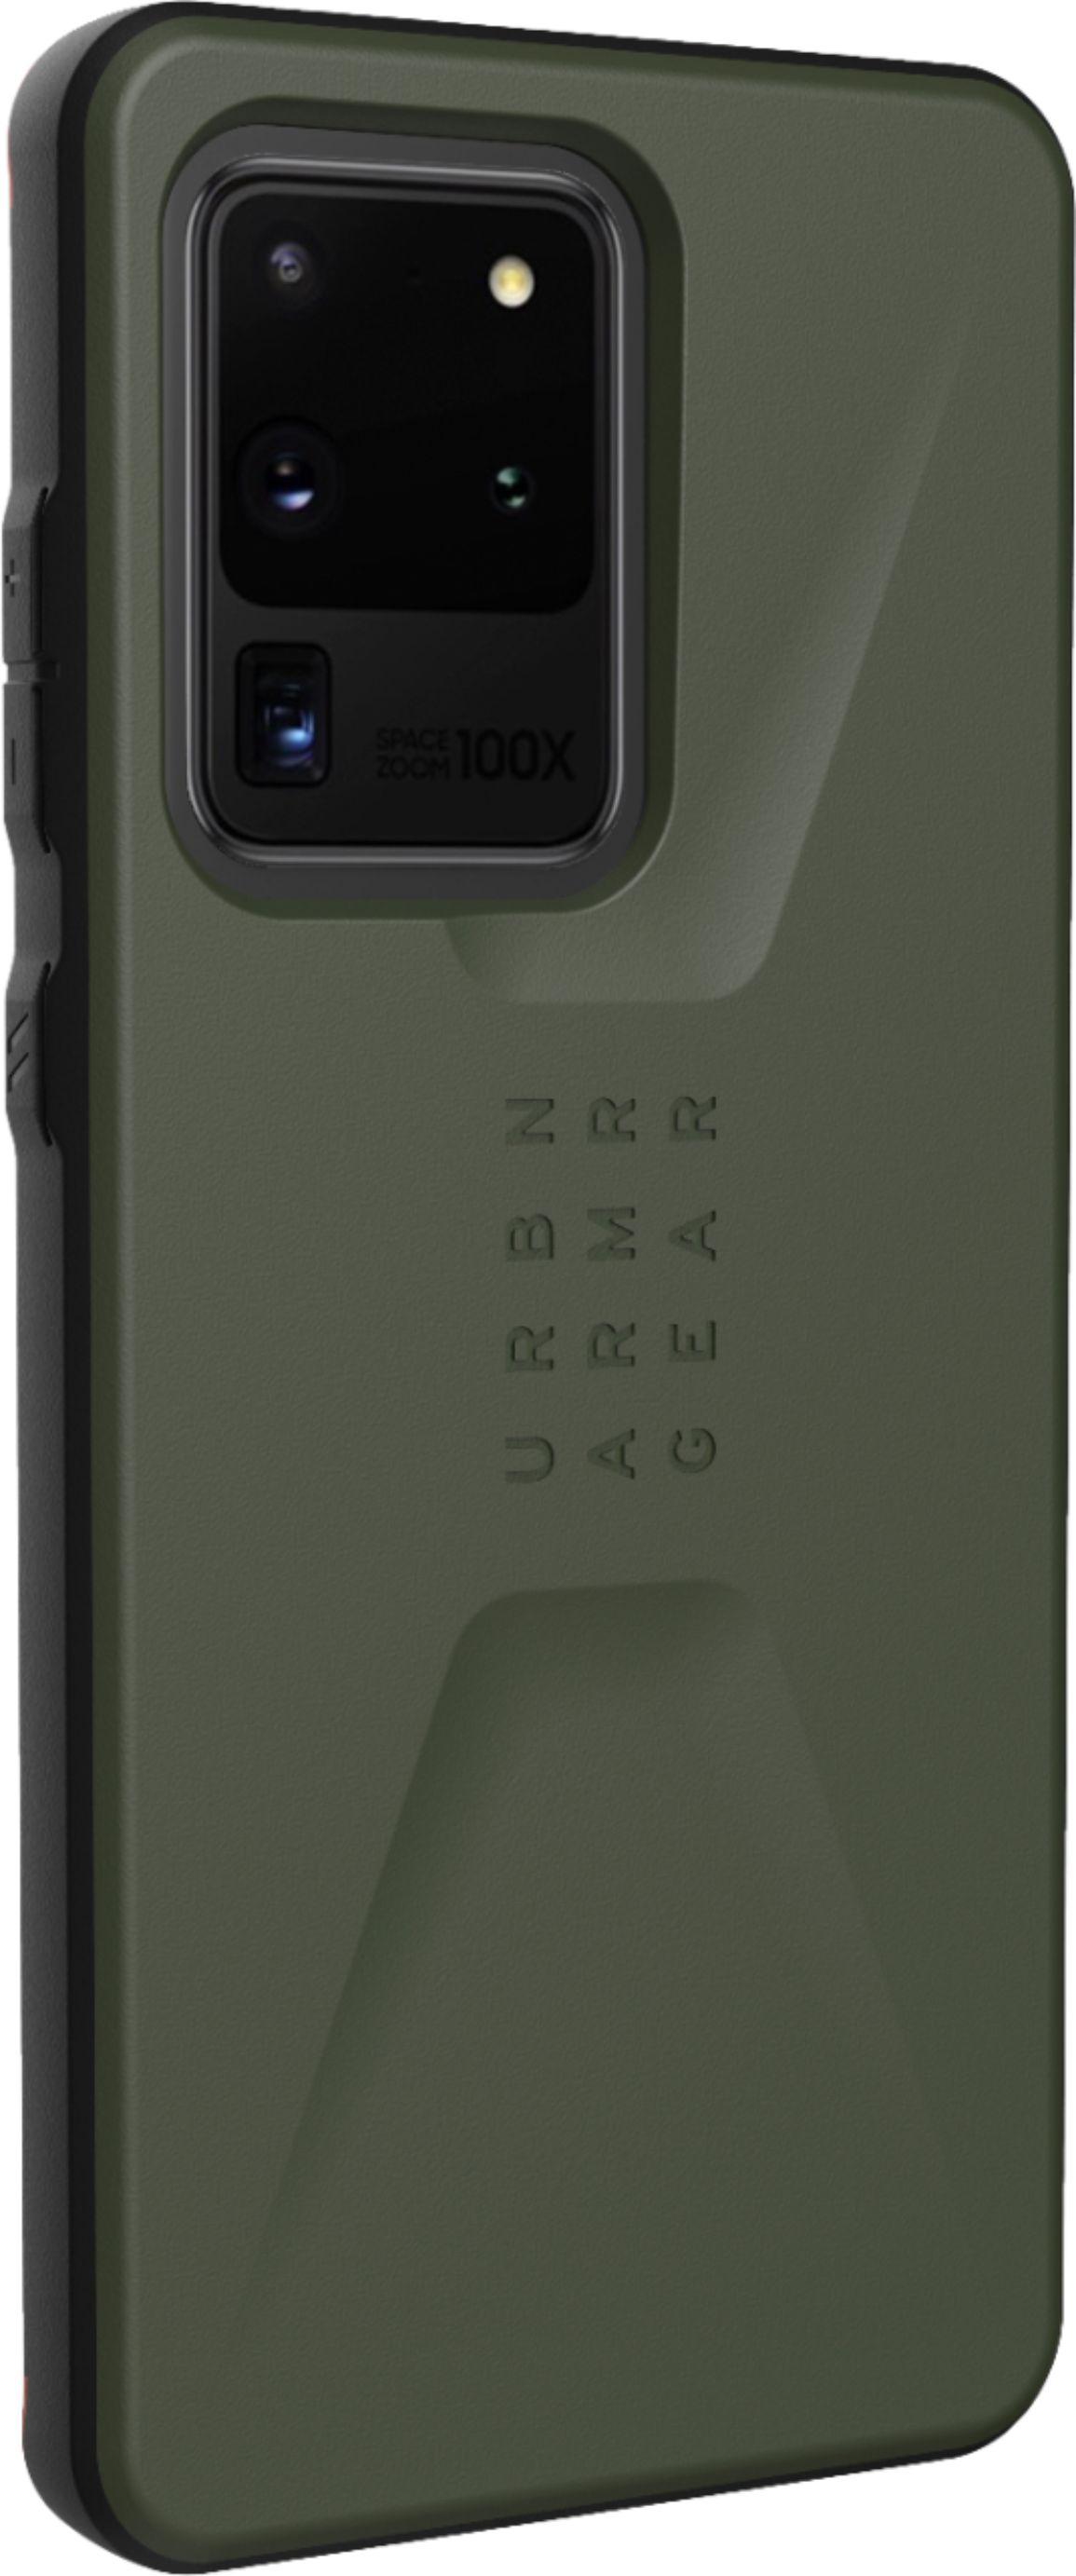 Angle View: UAG - Civilian Series Case for Samsung Galaxy S20 Ultra 5G - Olive Drab